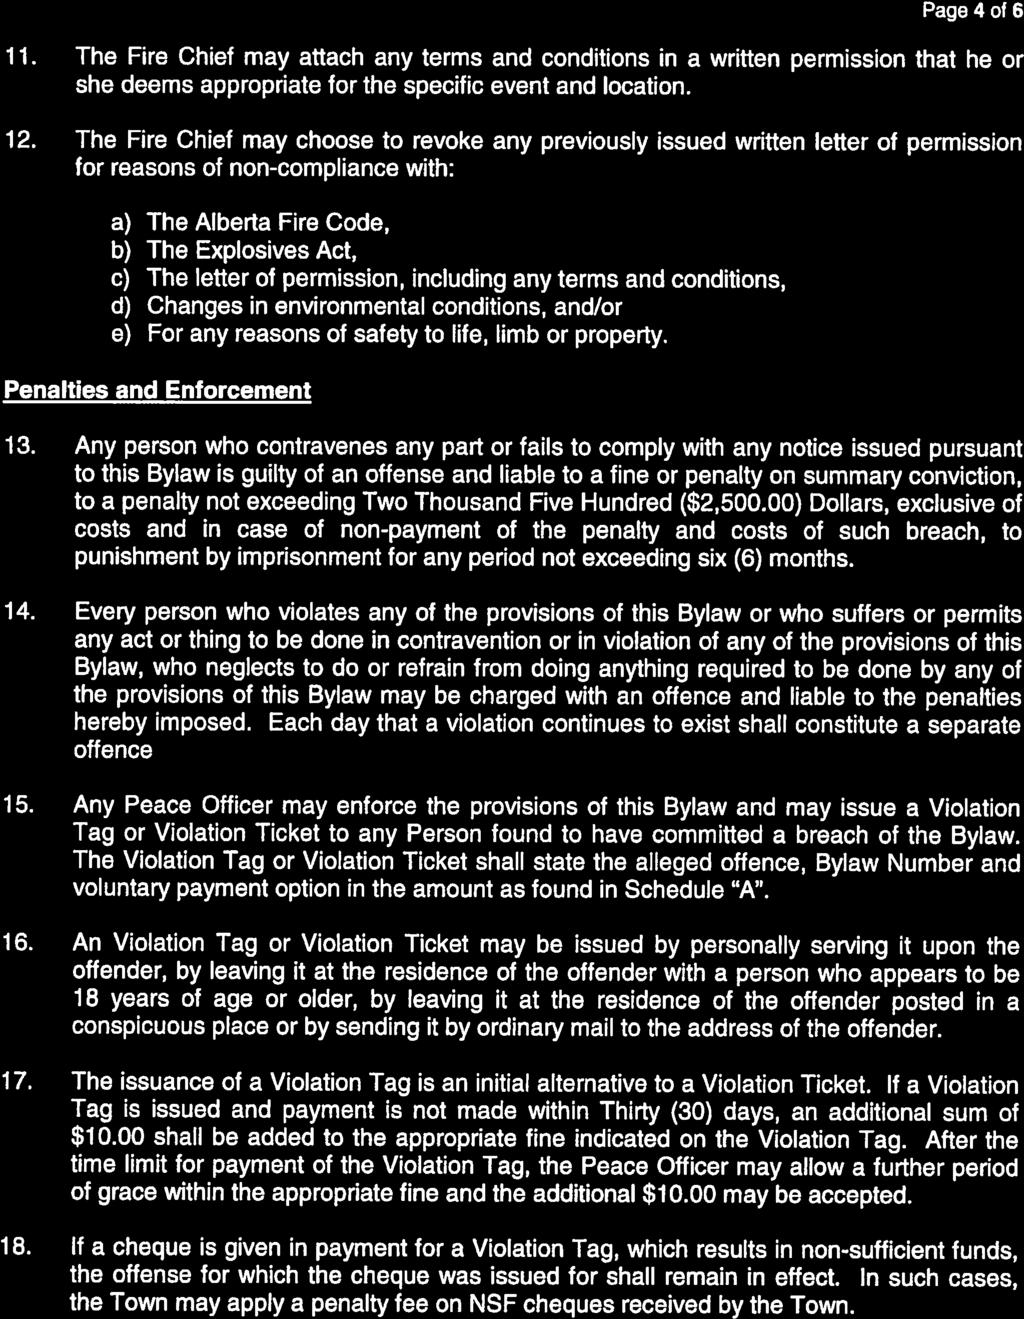 Page 4 of 6 11. The Fire Chief may attach any terms and conditions in a written permission that he or appropriate for the specific event and location. she deems choose 12.